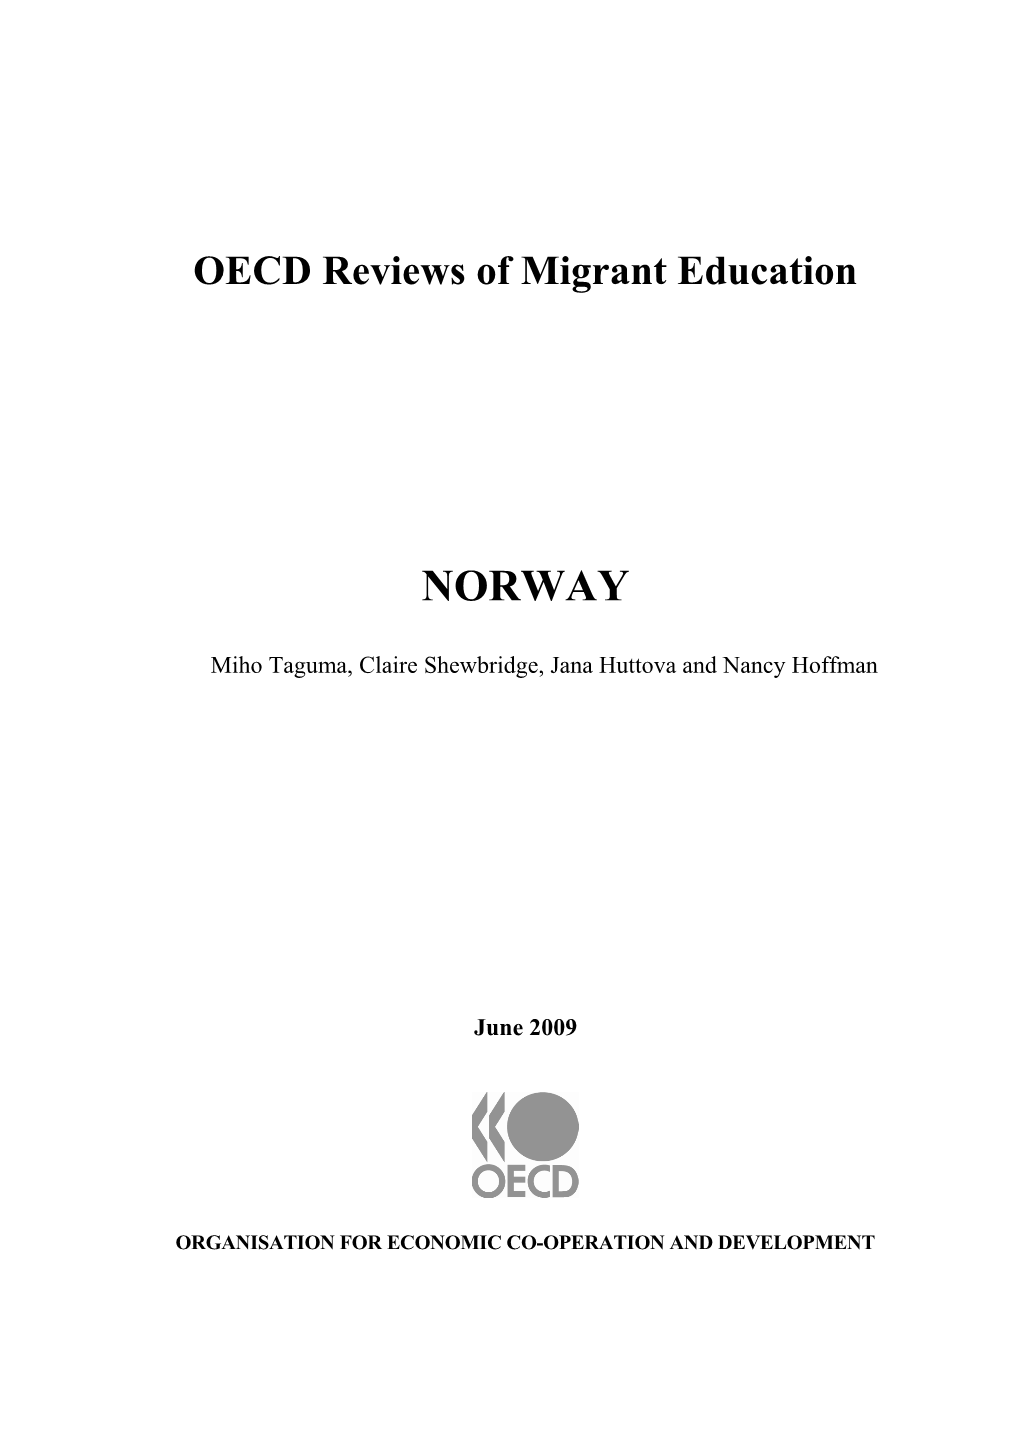 OECD Reviews of Migrant Education